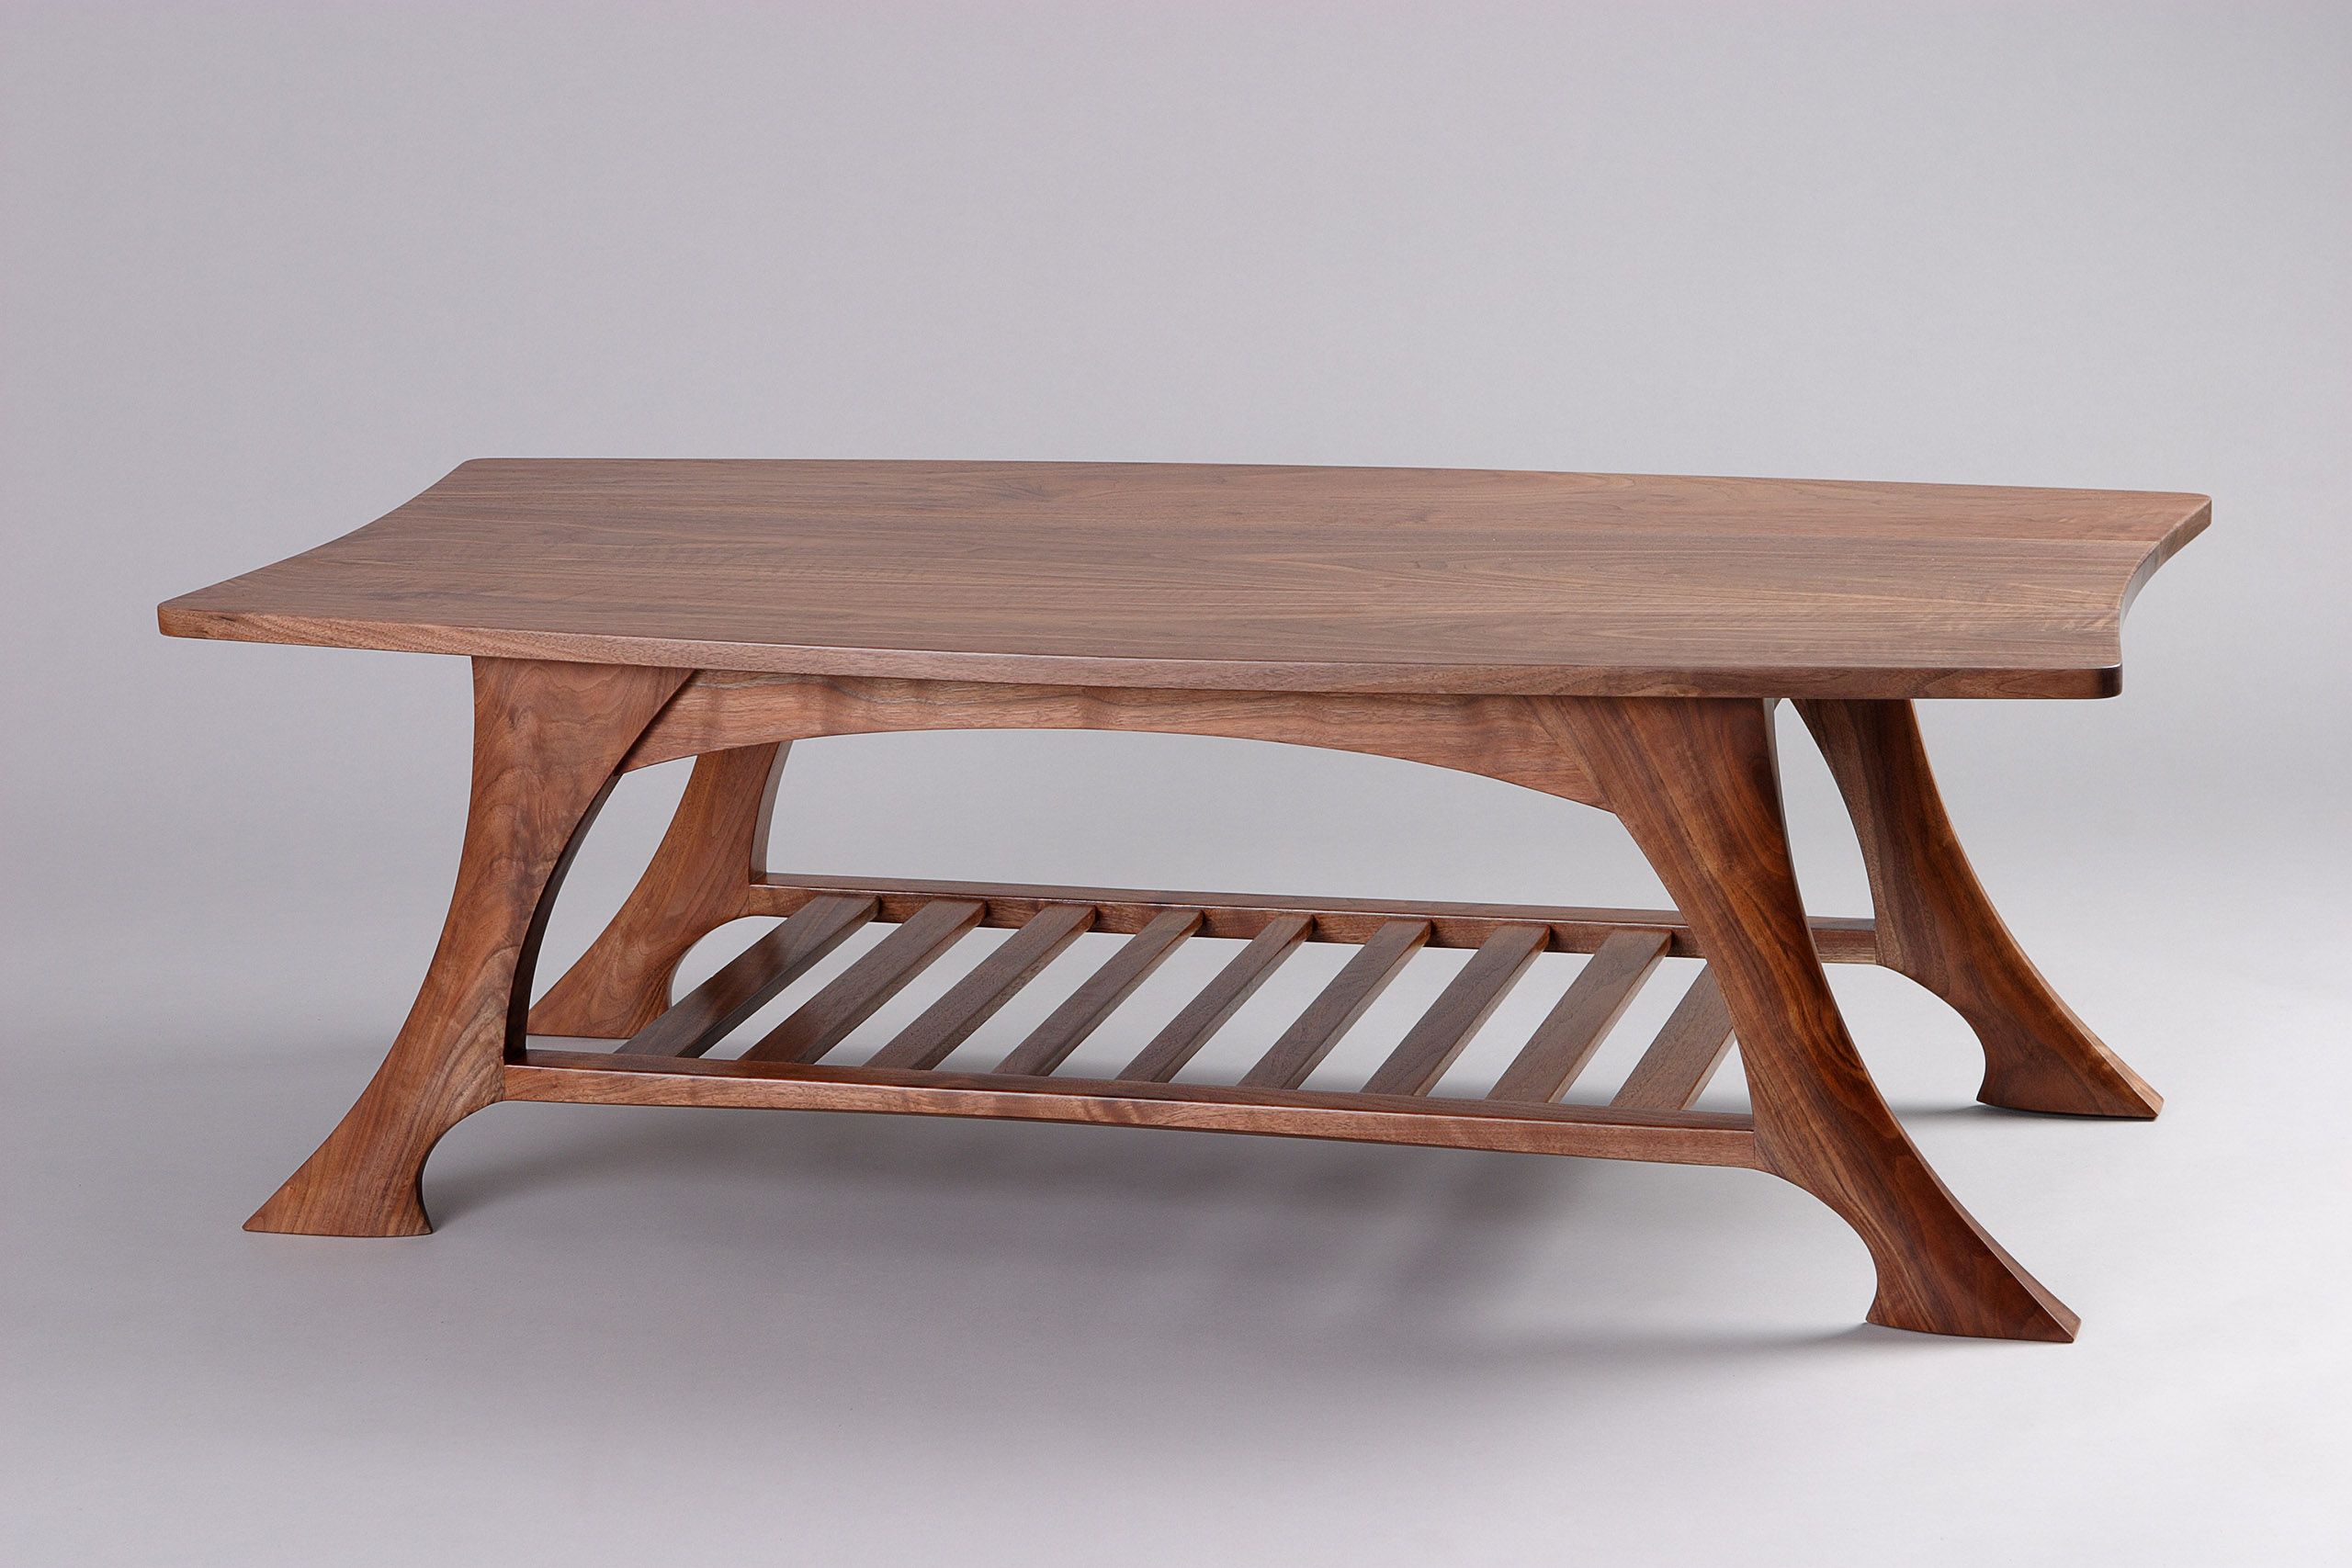 Casa Grande Coffee Table | Black Walnut Solid Wood – Seth Rolland Within Coffee Tables With Solid Legs (View 10 of 15)